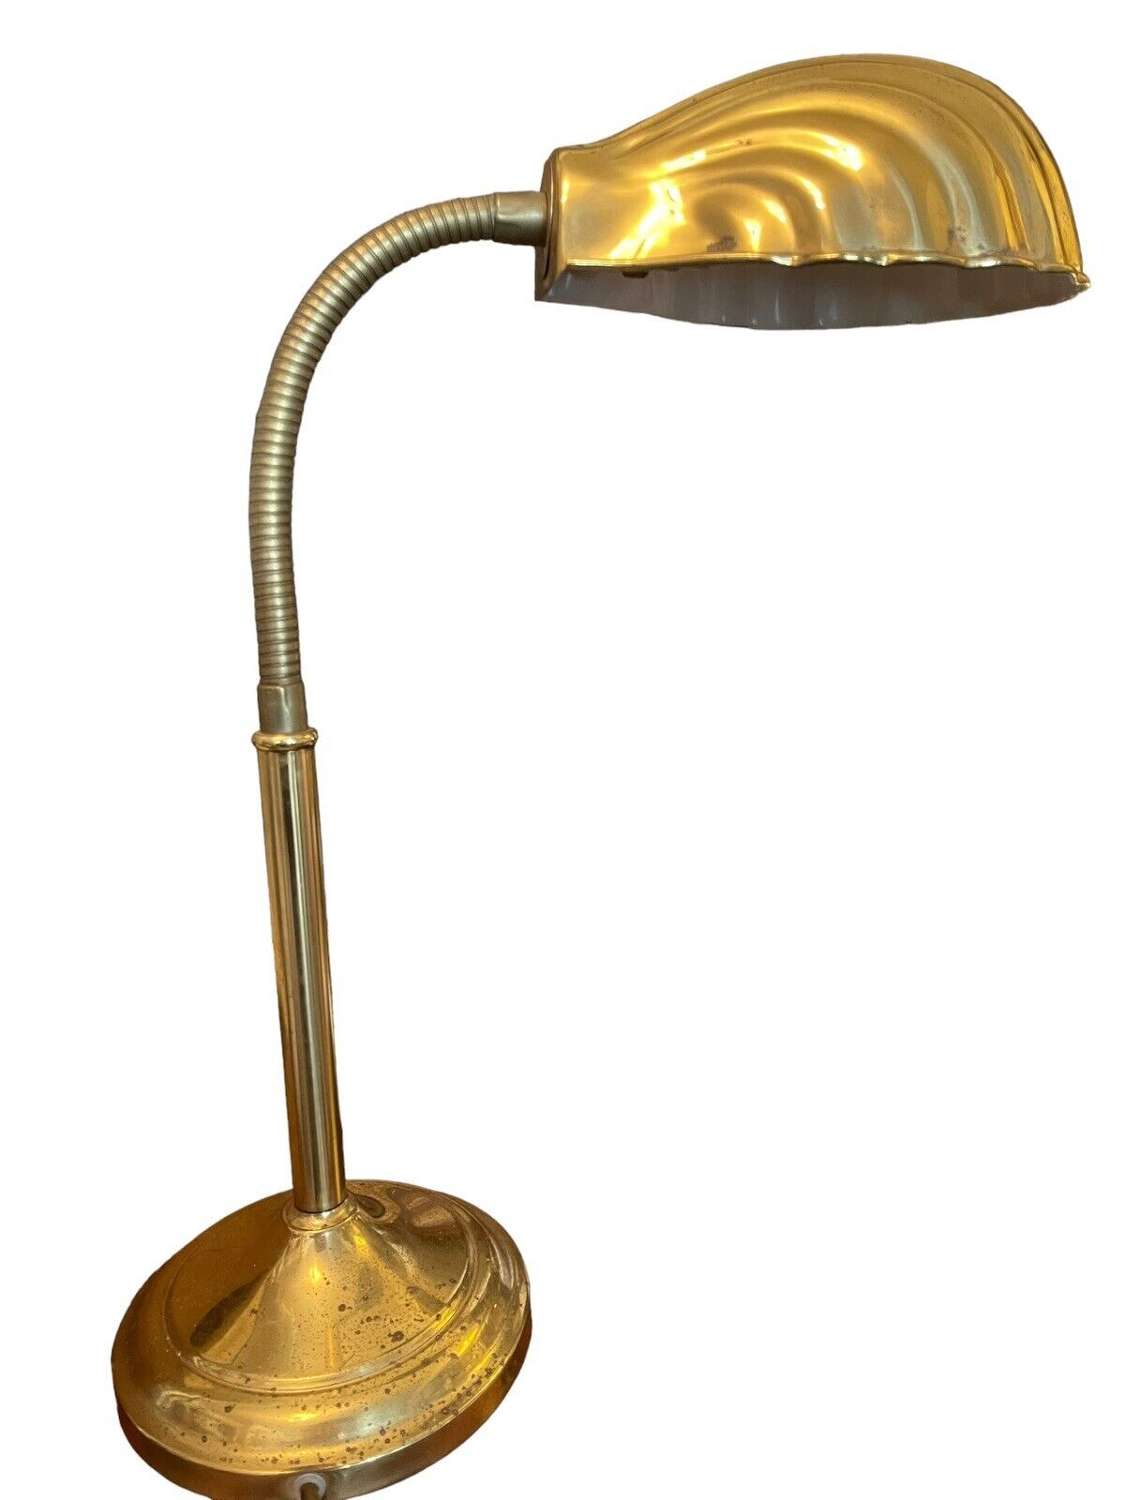 ART DECO STYLE BRASS GOOSENECK LAMP - WITH CLAM SHELL SHADE -